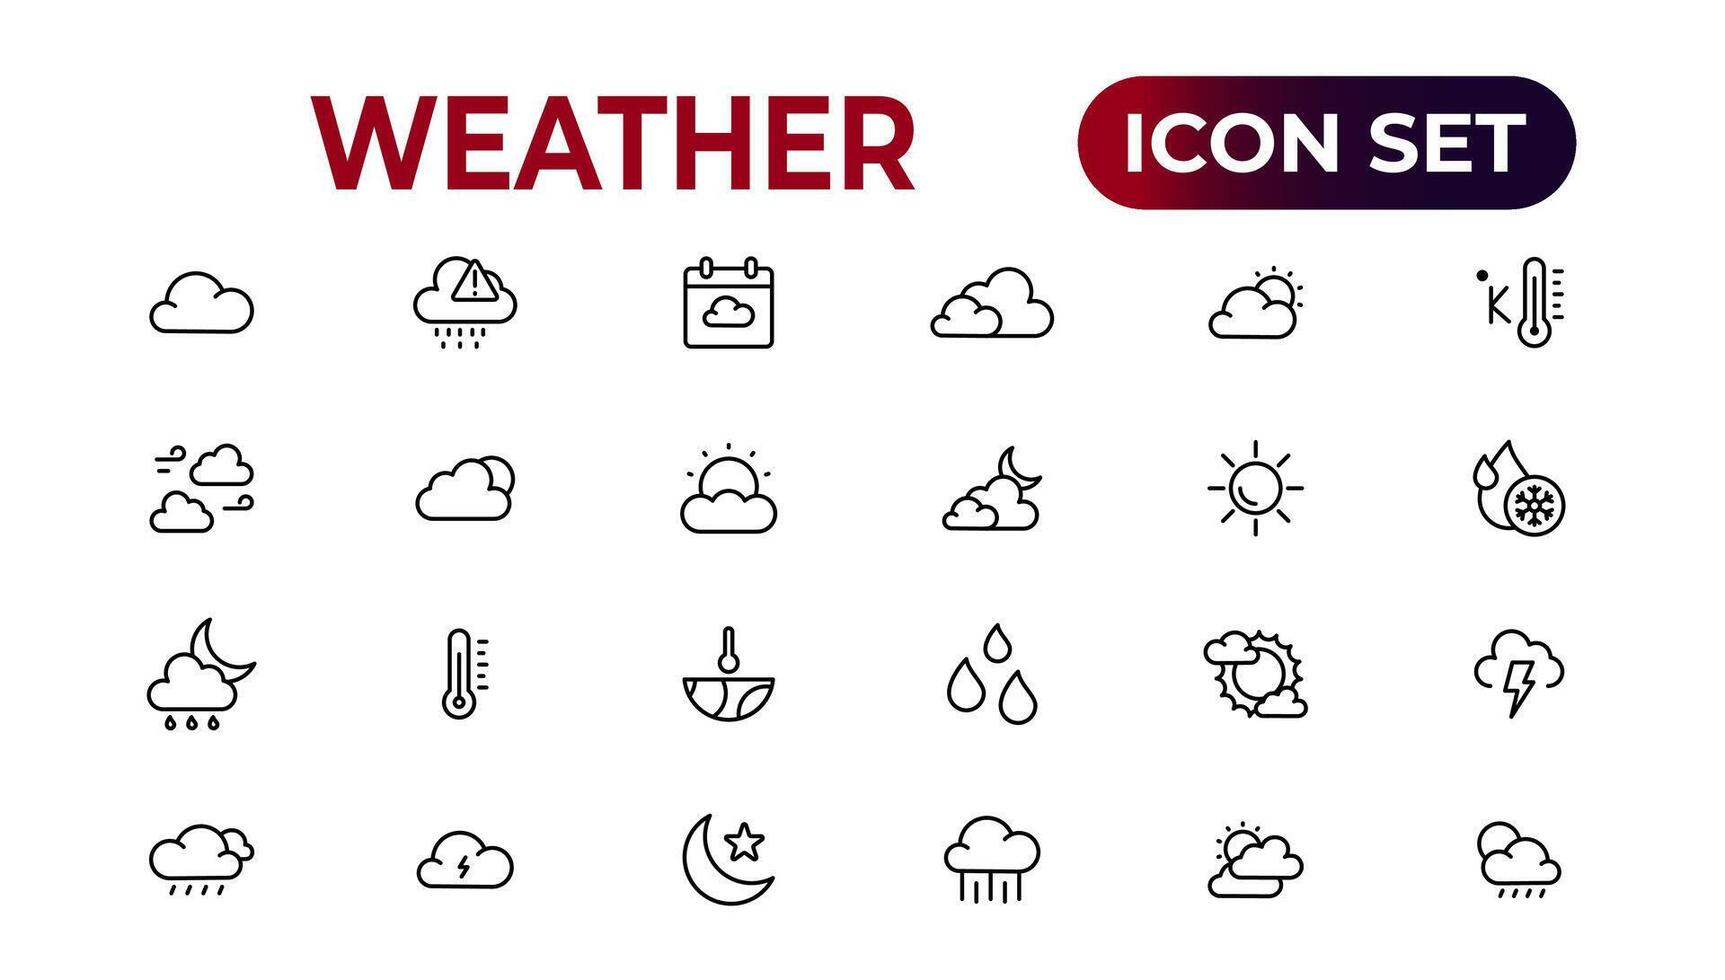 Weather icons. Weather forecast icon set. Clouds logo. Weather , clouds, sunny day, moon, snowflakes, wind, sun day. Vector illustration.